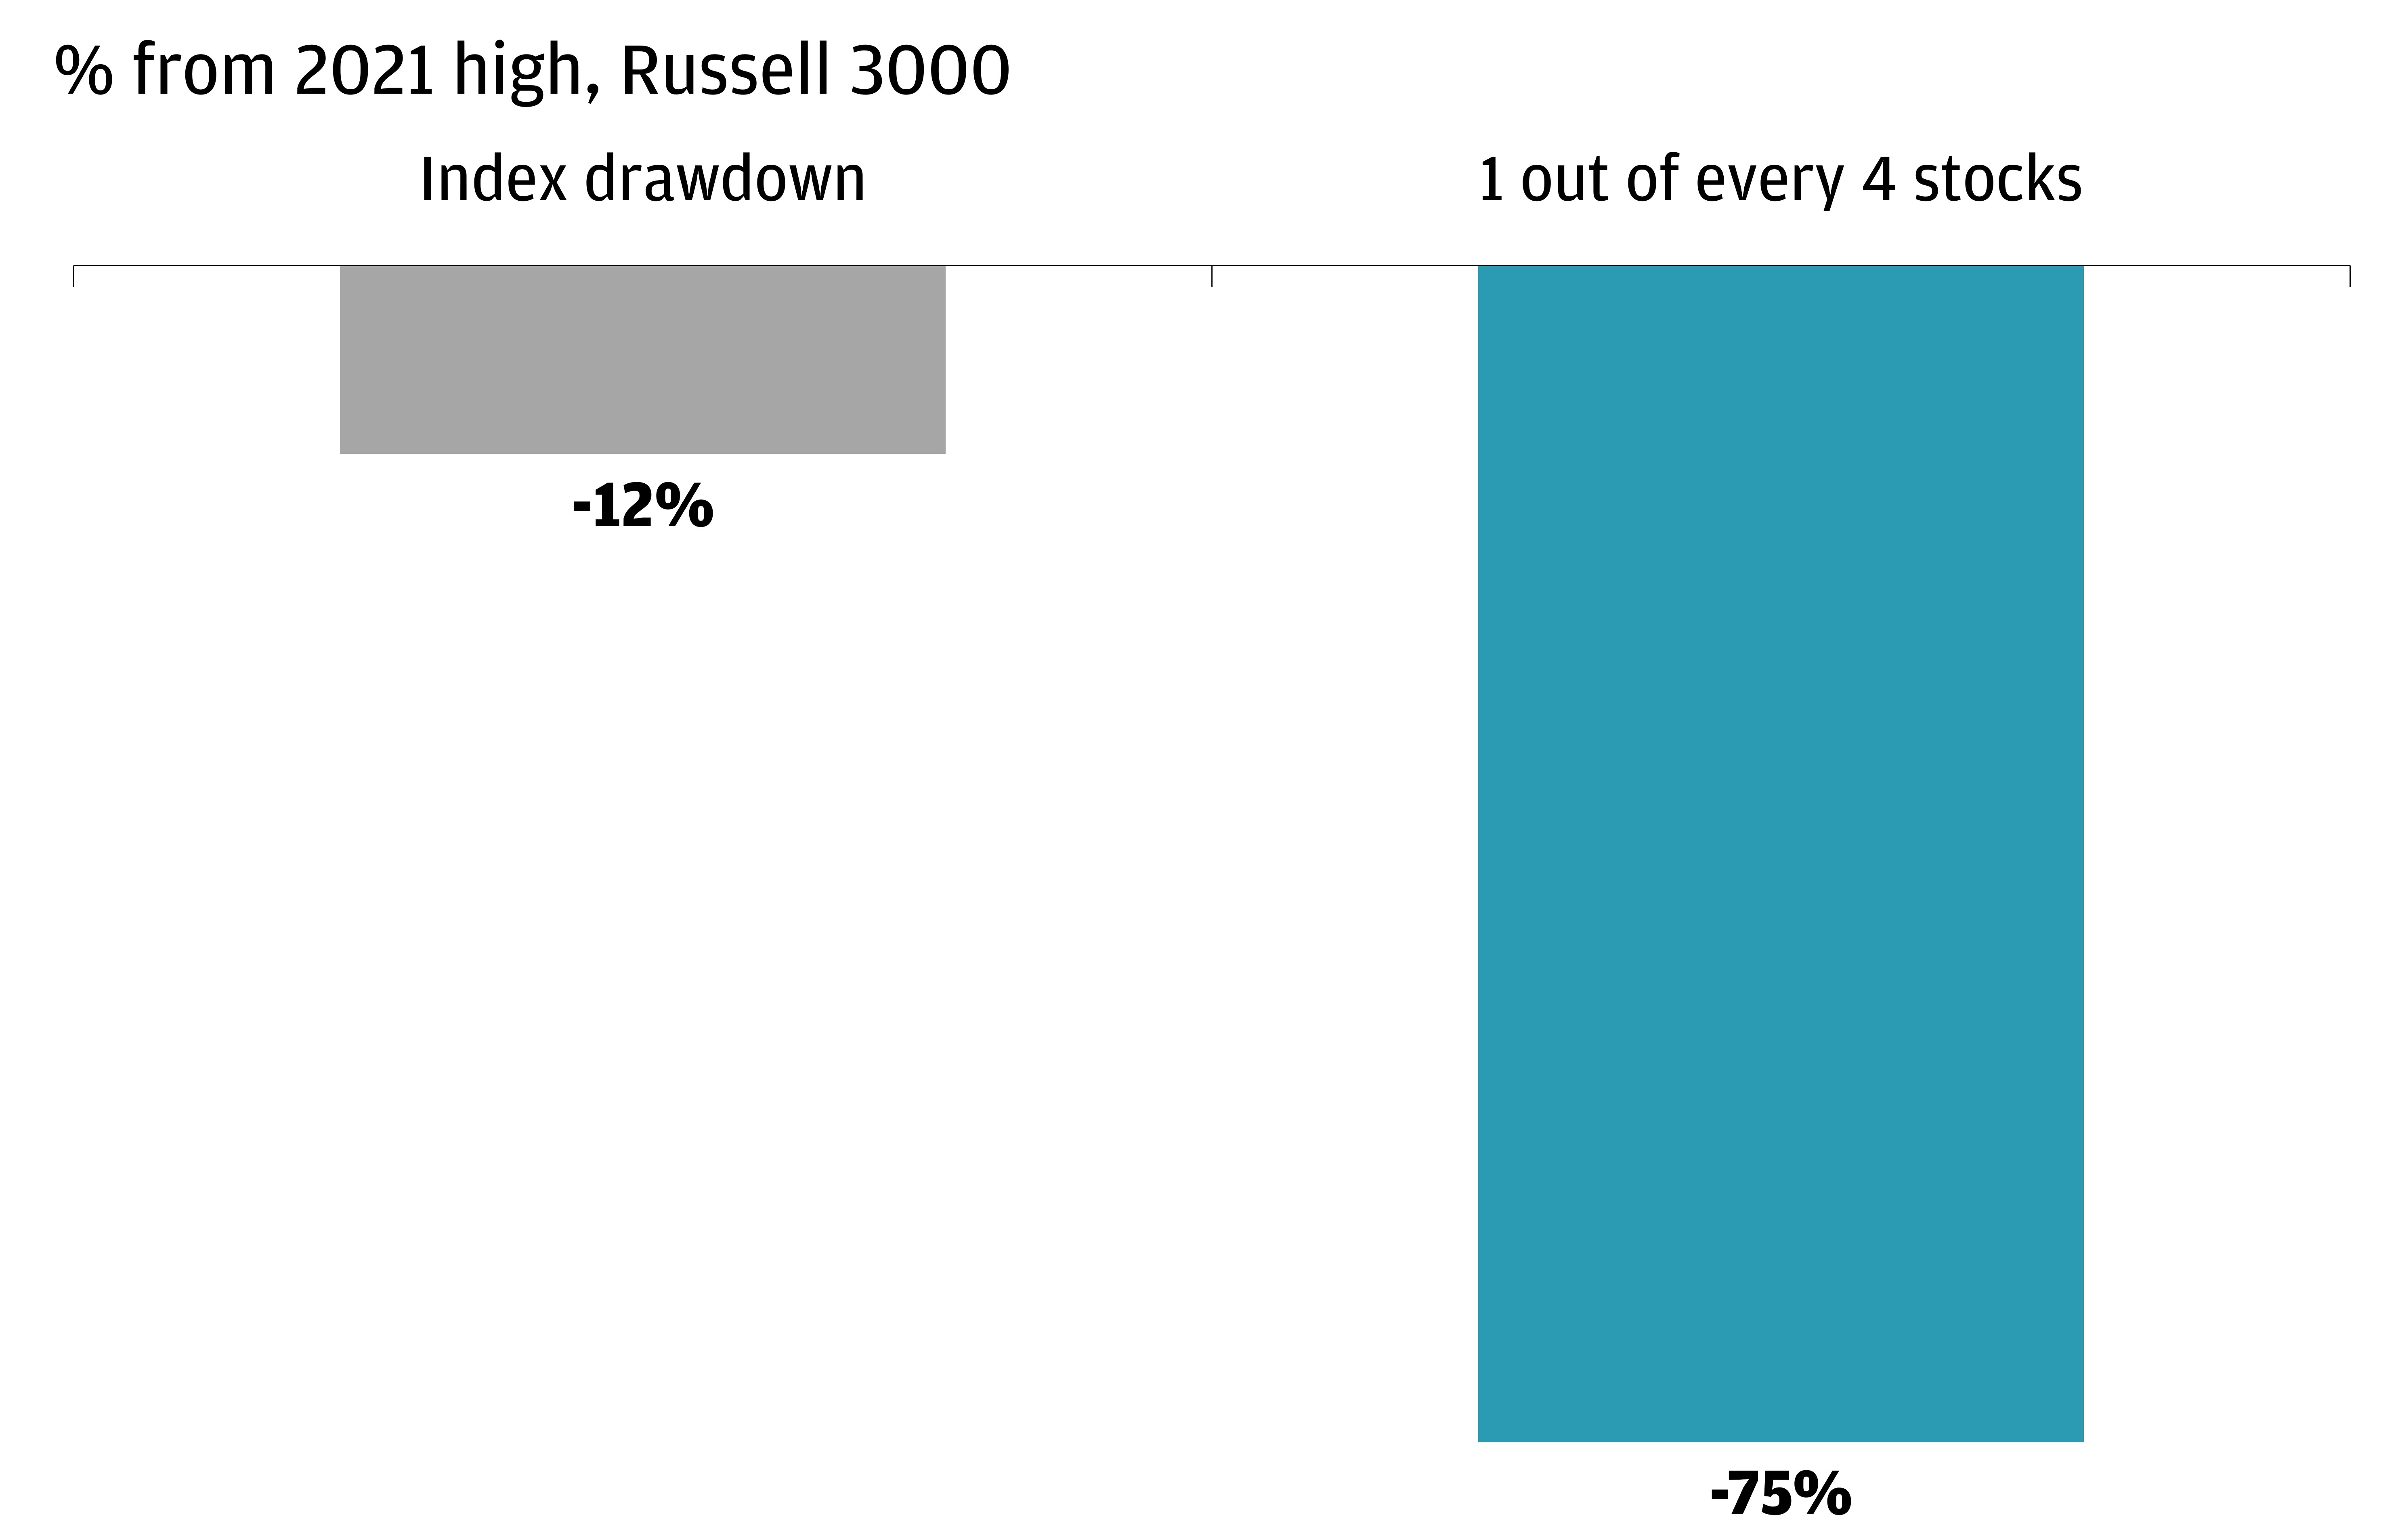 The chart describes the index drawdown of Russell 3000 and the 1 out of every 4 stocks drawdown of Russell 3000 from the 2021 high. 